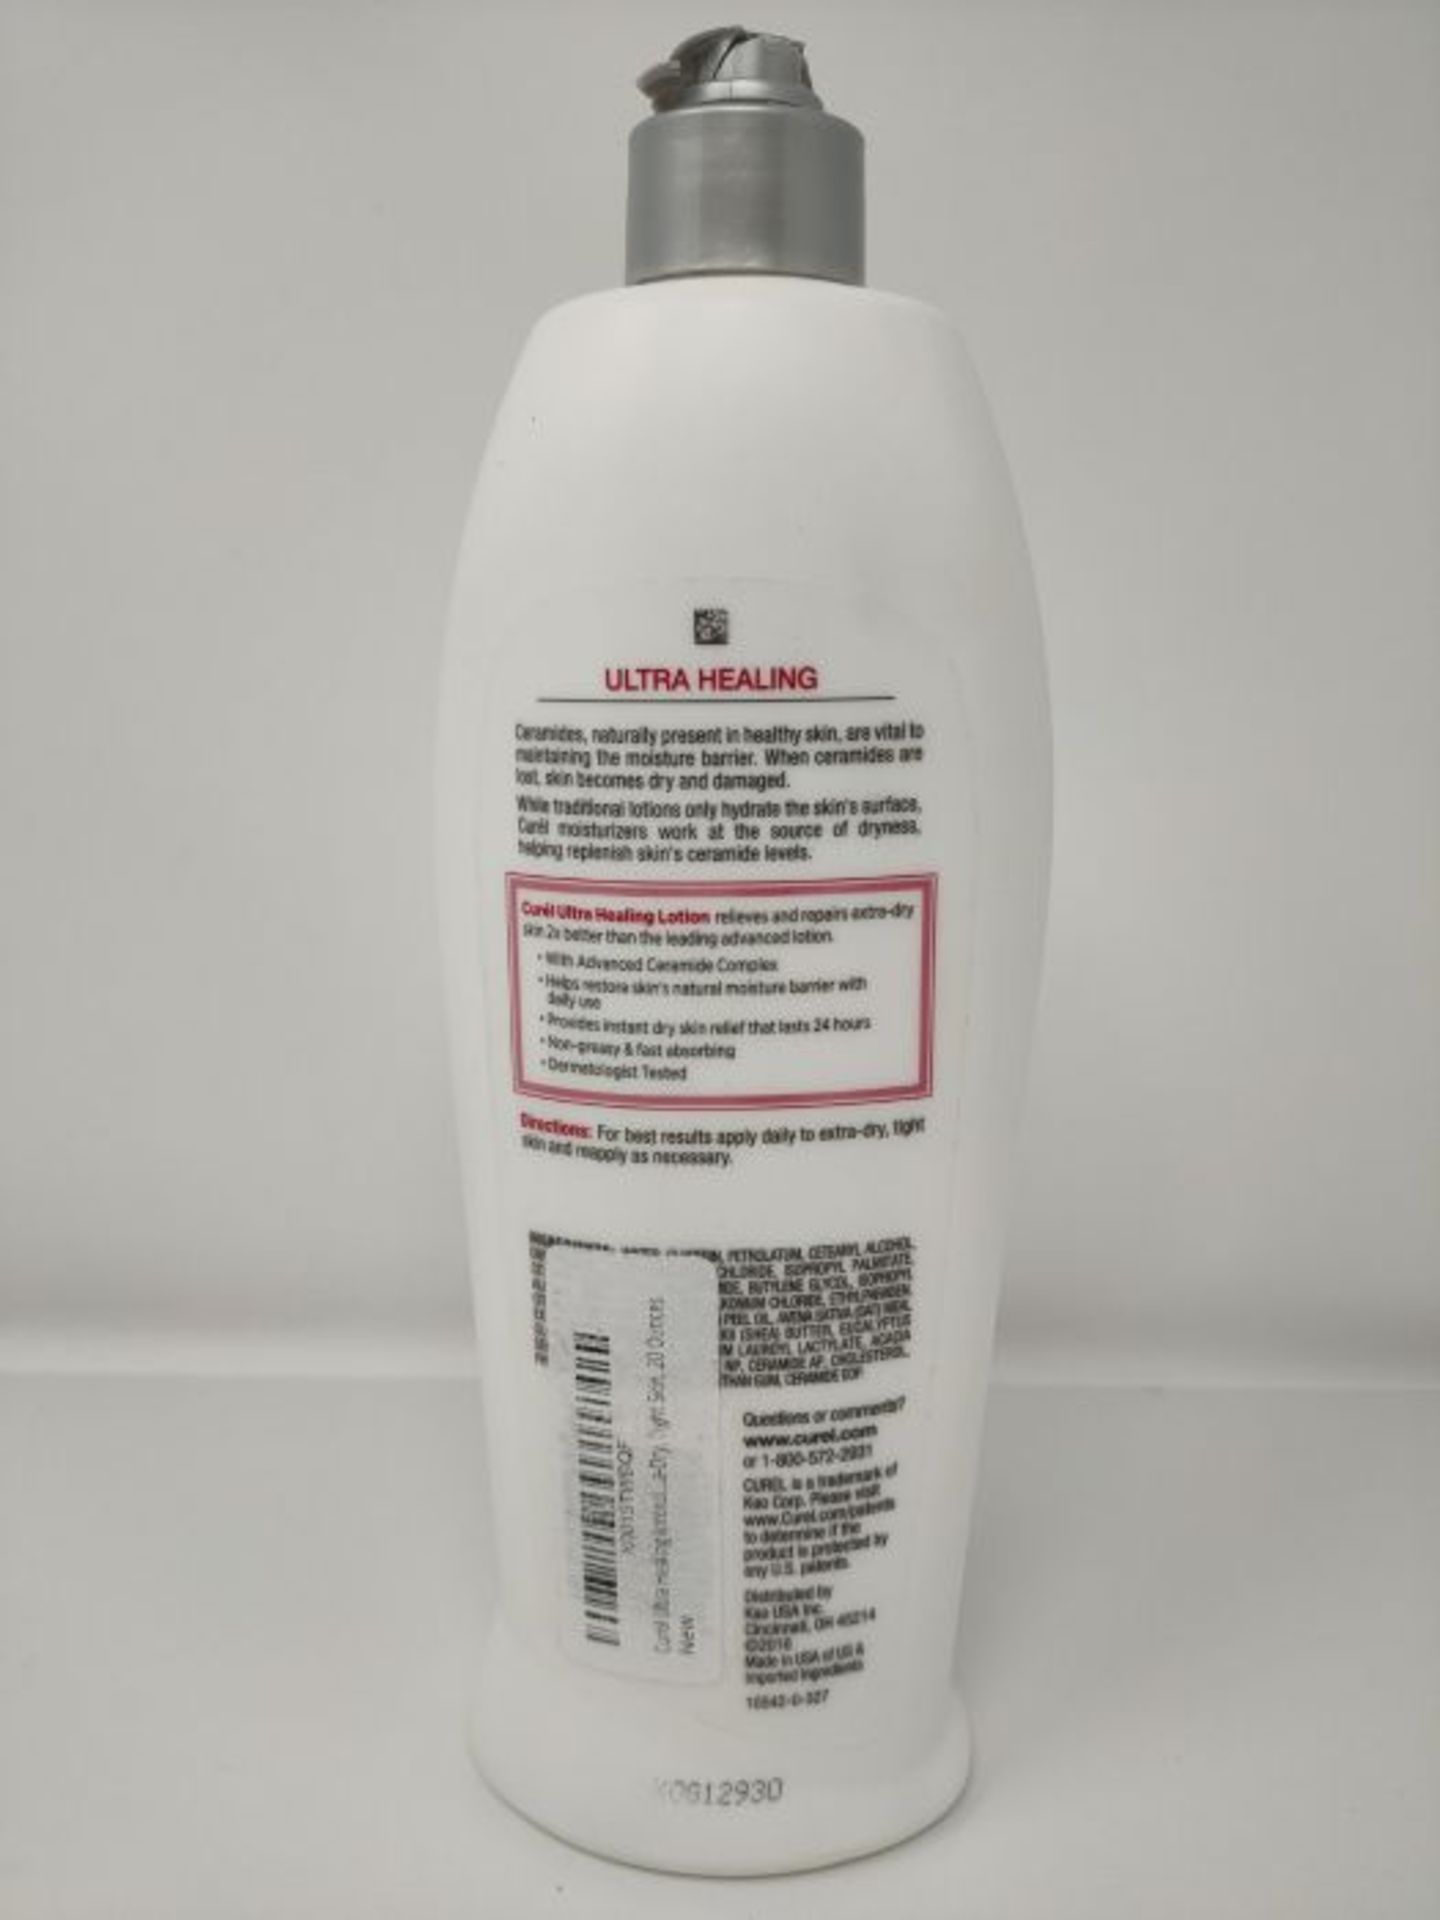 [CRACKED] Curél Ultra Healing Intensive Lotion for Extra-Dry, Tight Skin, 20 Ounces - Image 3 of 3